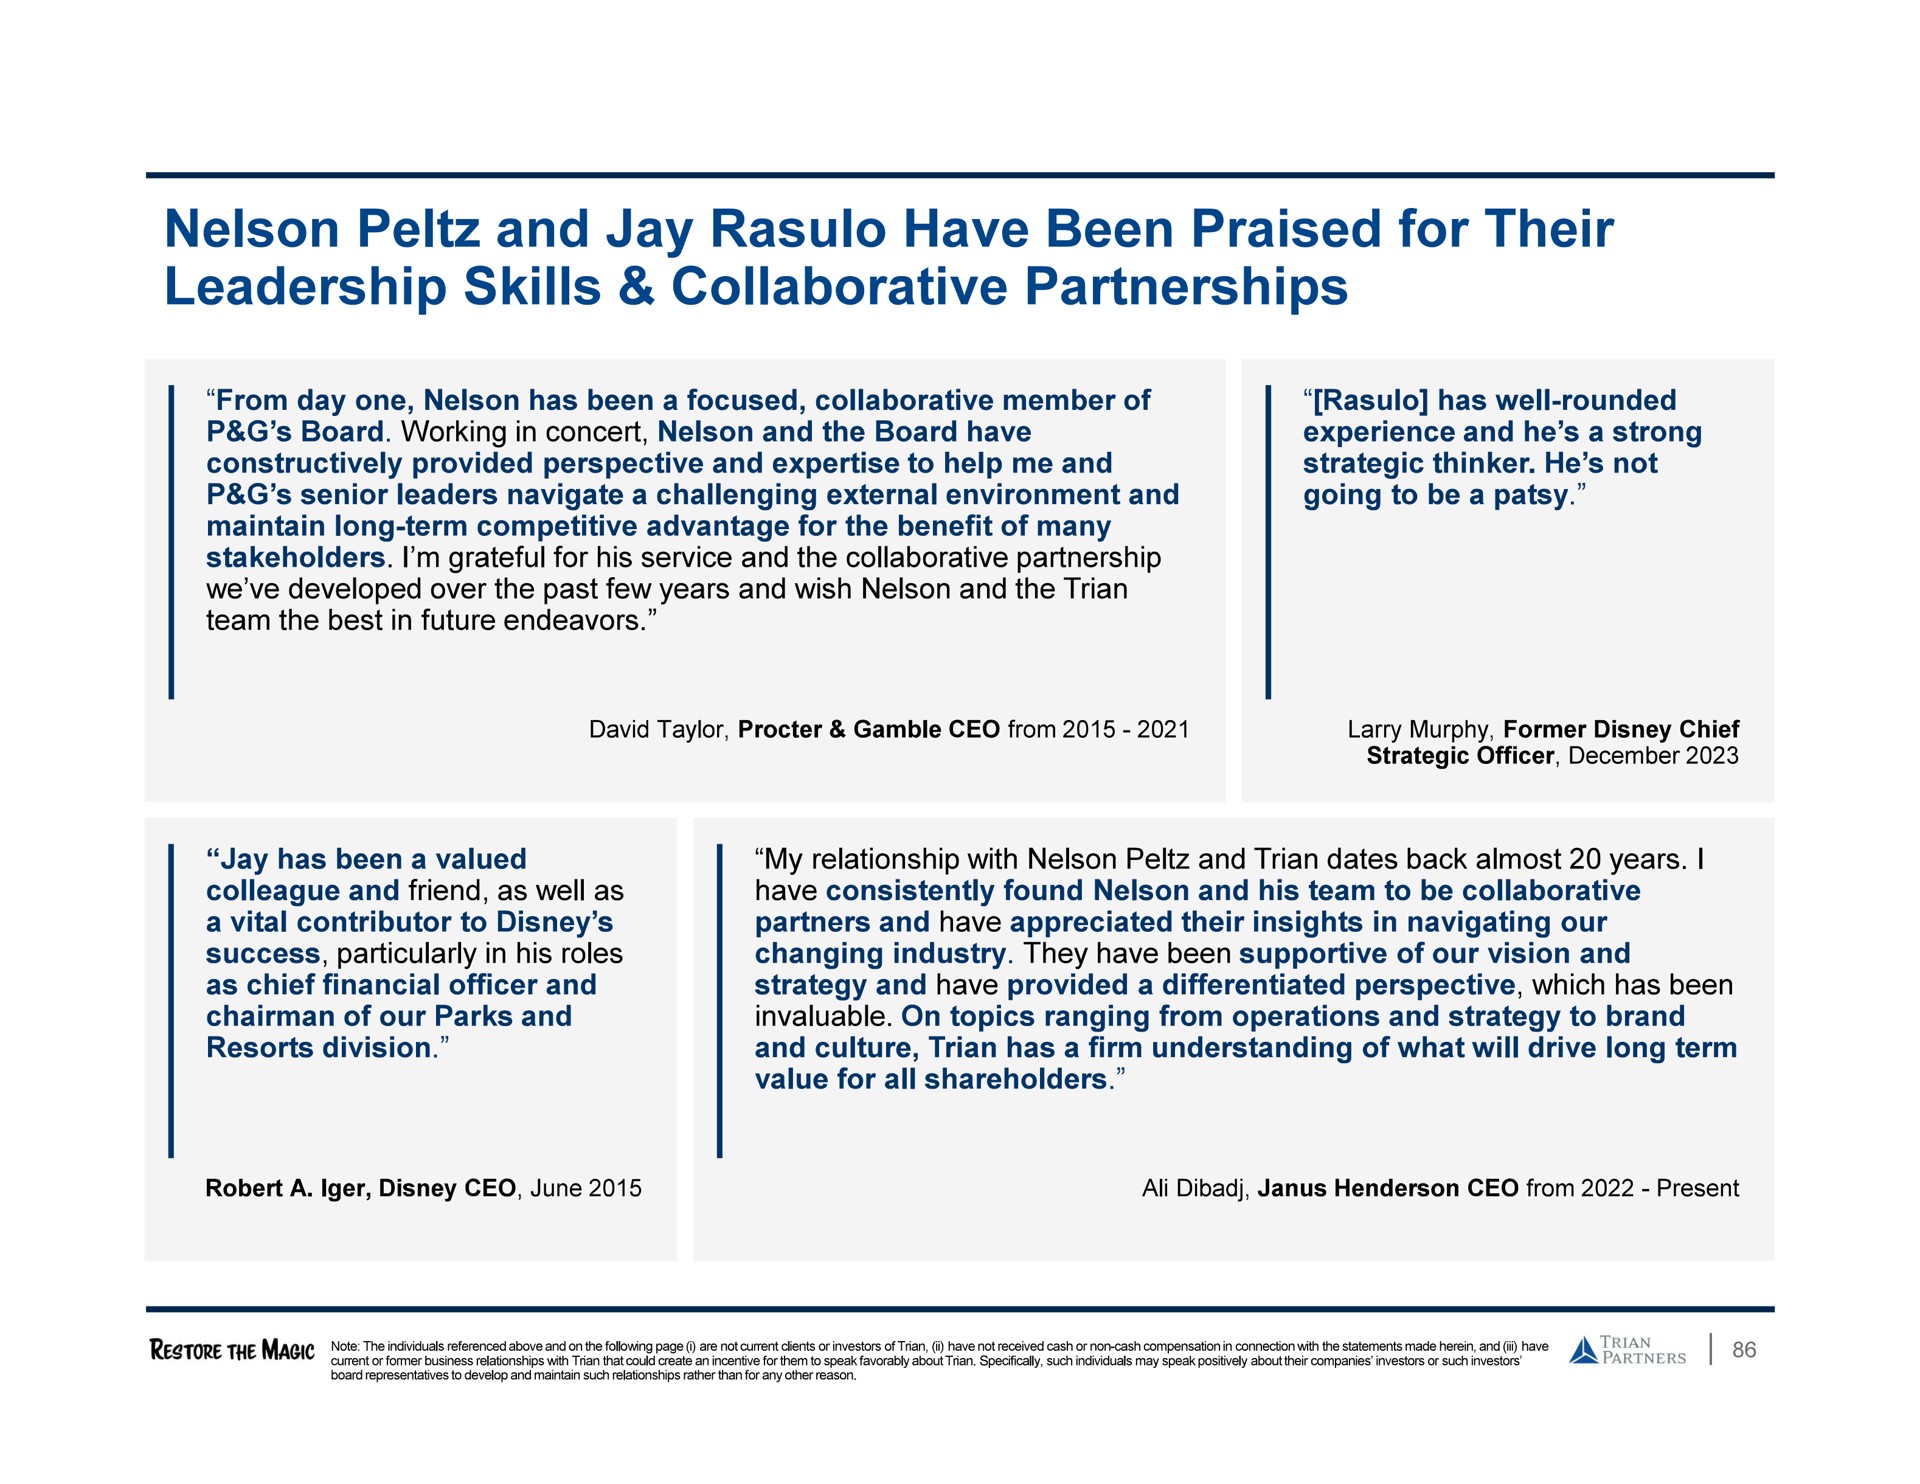 nelson and jay have been praised for their leadership skills collaborative partnerships | Trian Partners